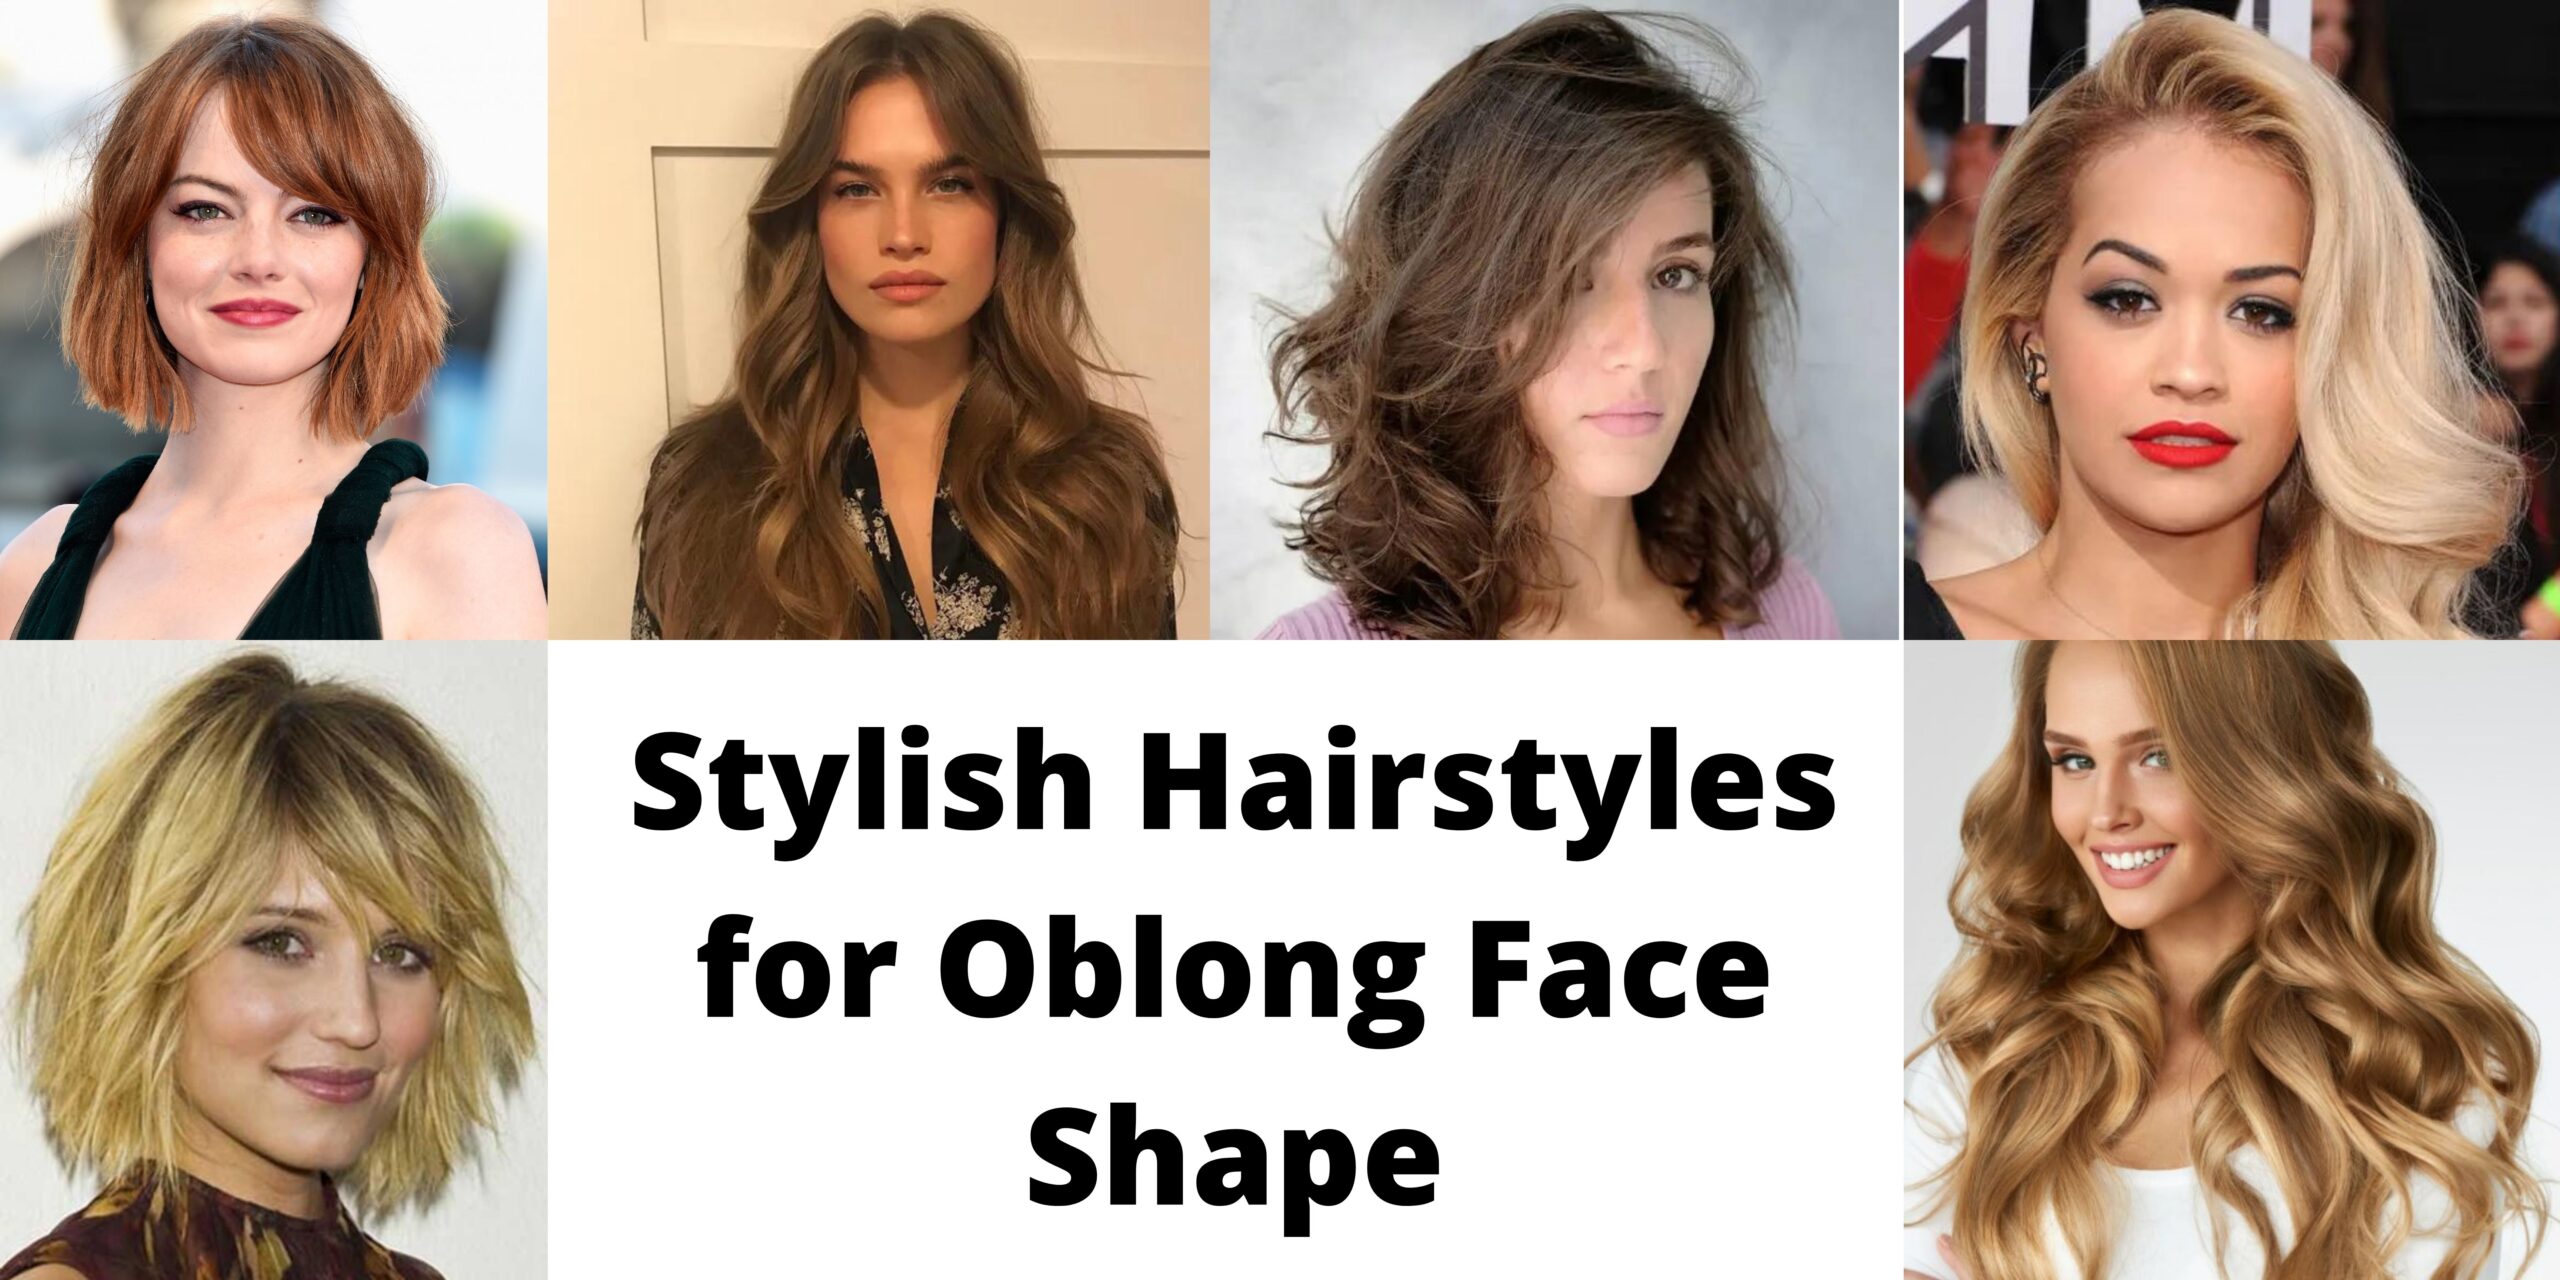 Stylish Hairstyles for Oblong face shape